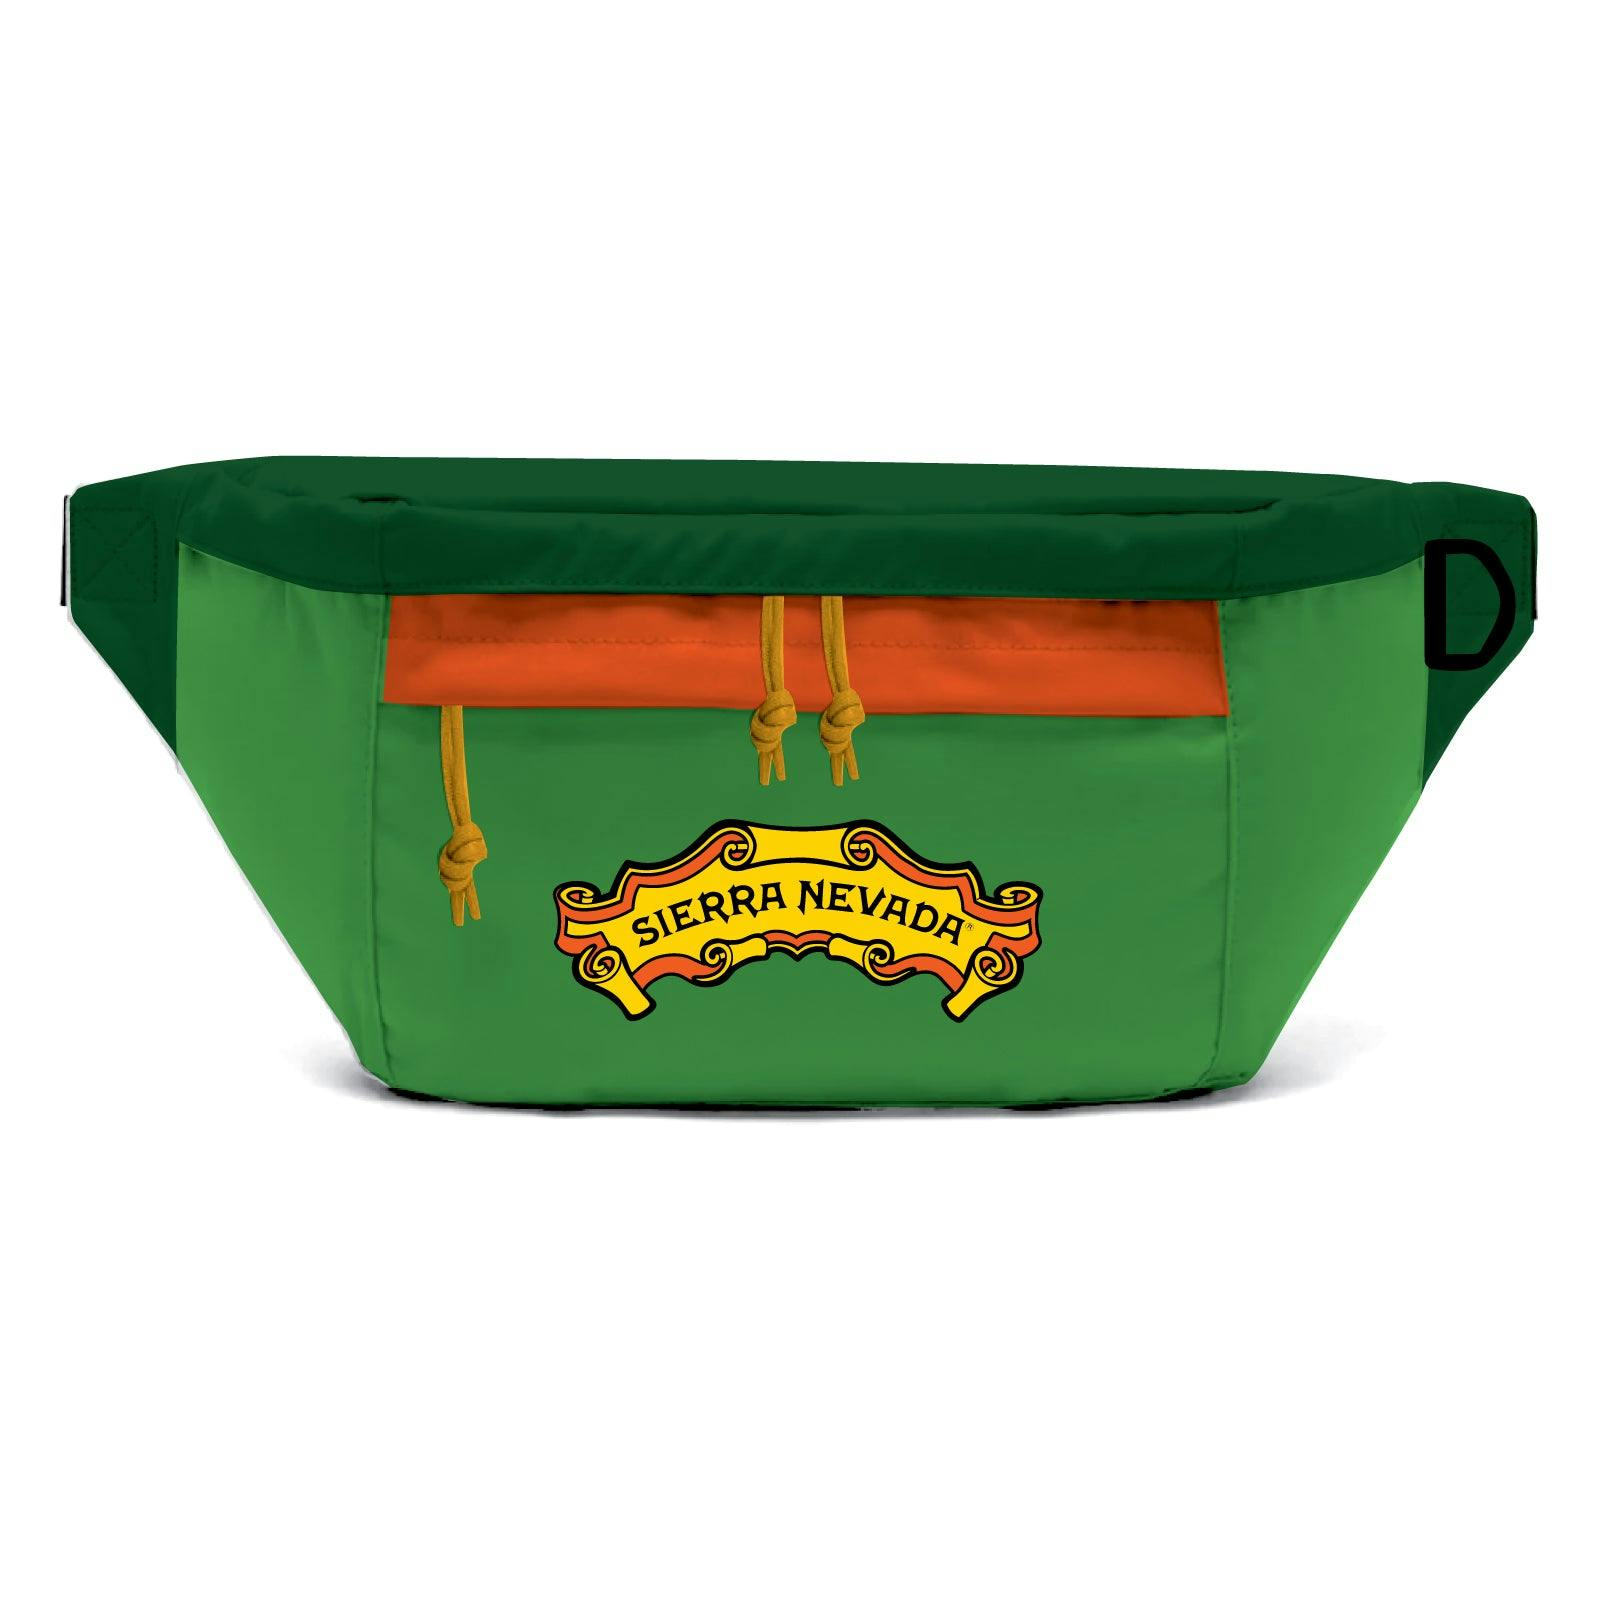 Sierra Nevada green fanny pack - front view